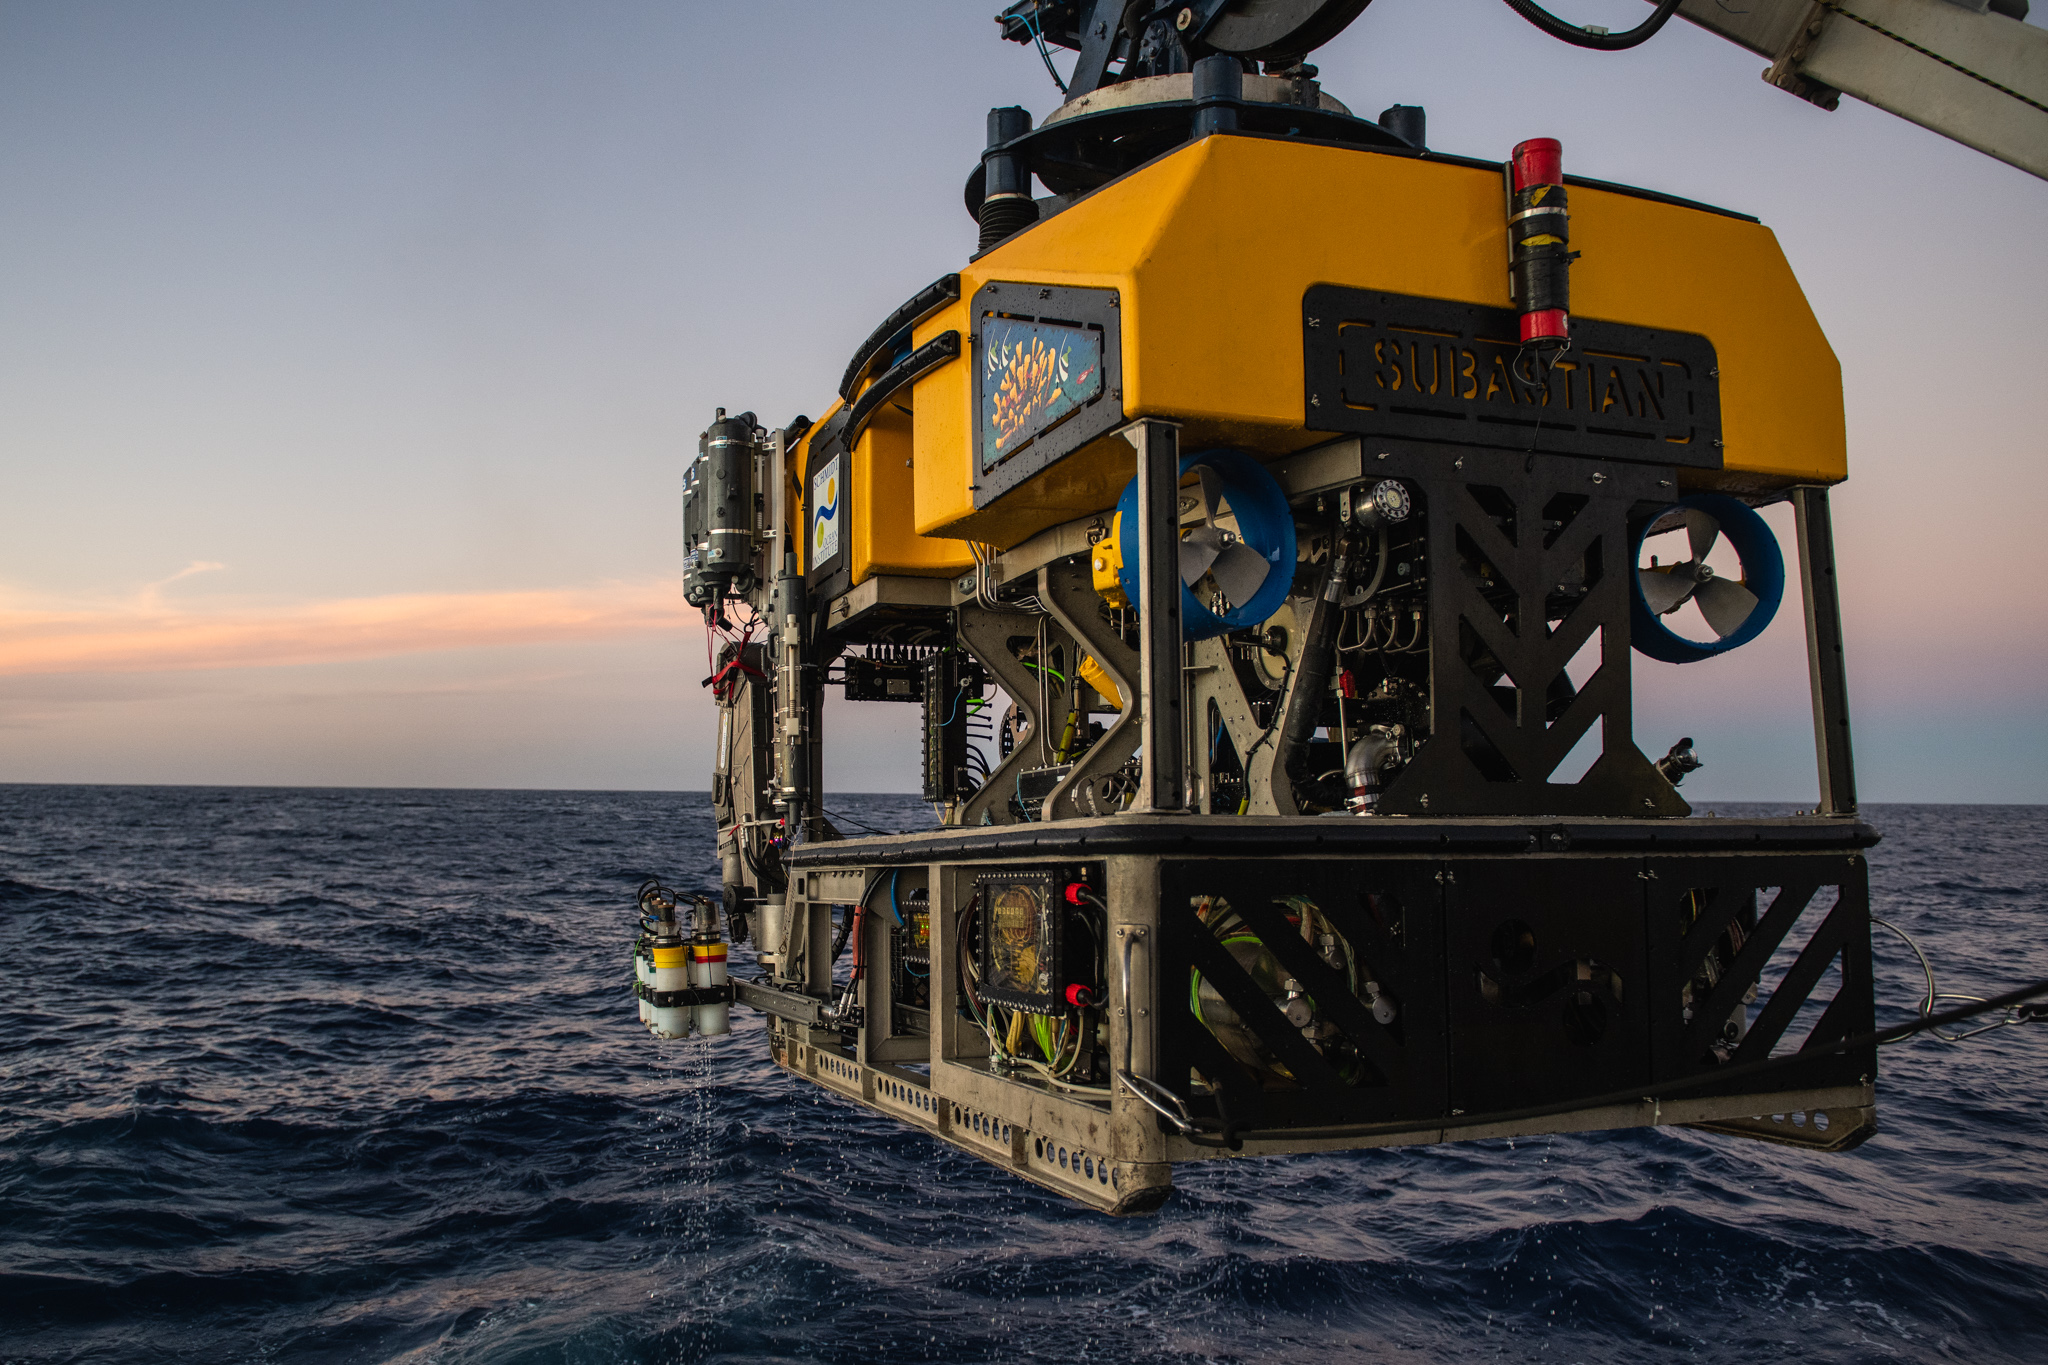 ROV SuBastian is lifted back in deck after another day's dive down to 2500+ m in the Cape Range Canyon off Ningaloo in western Australia.